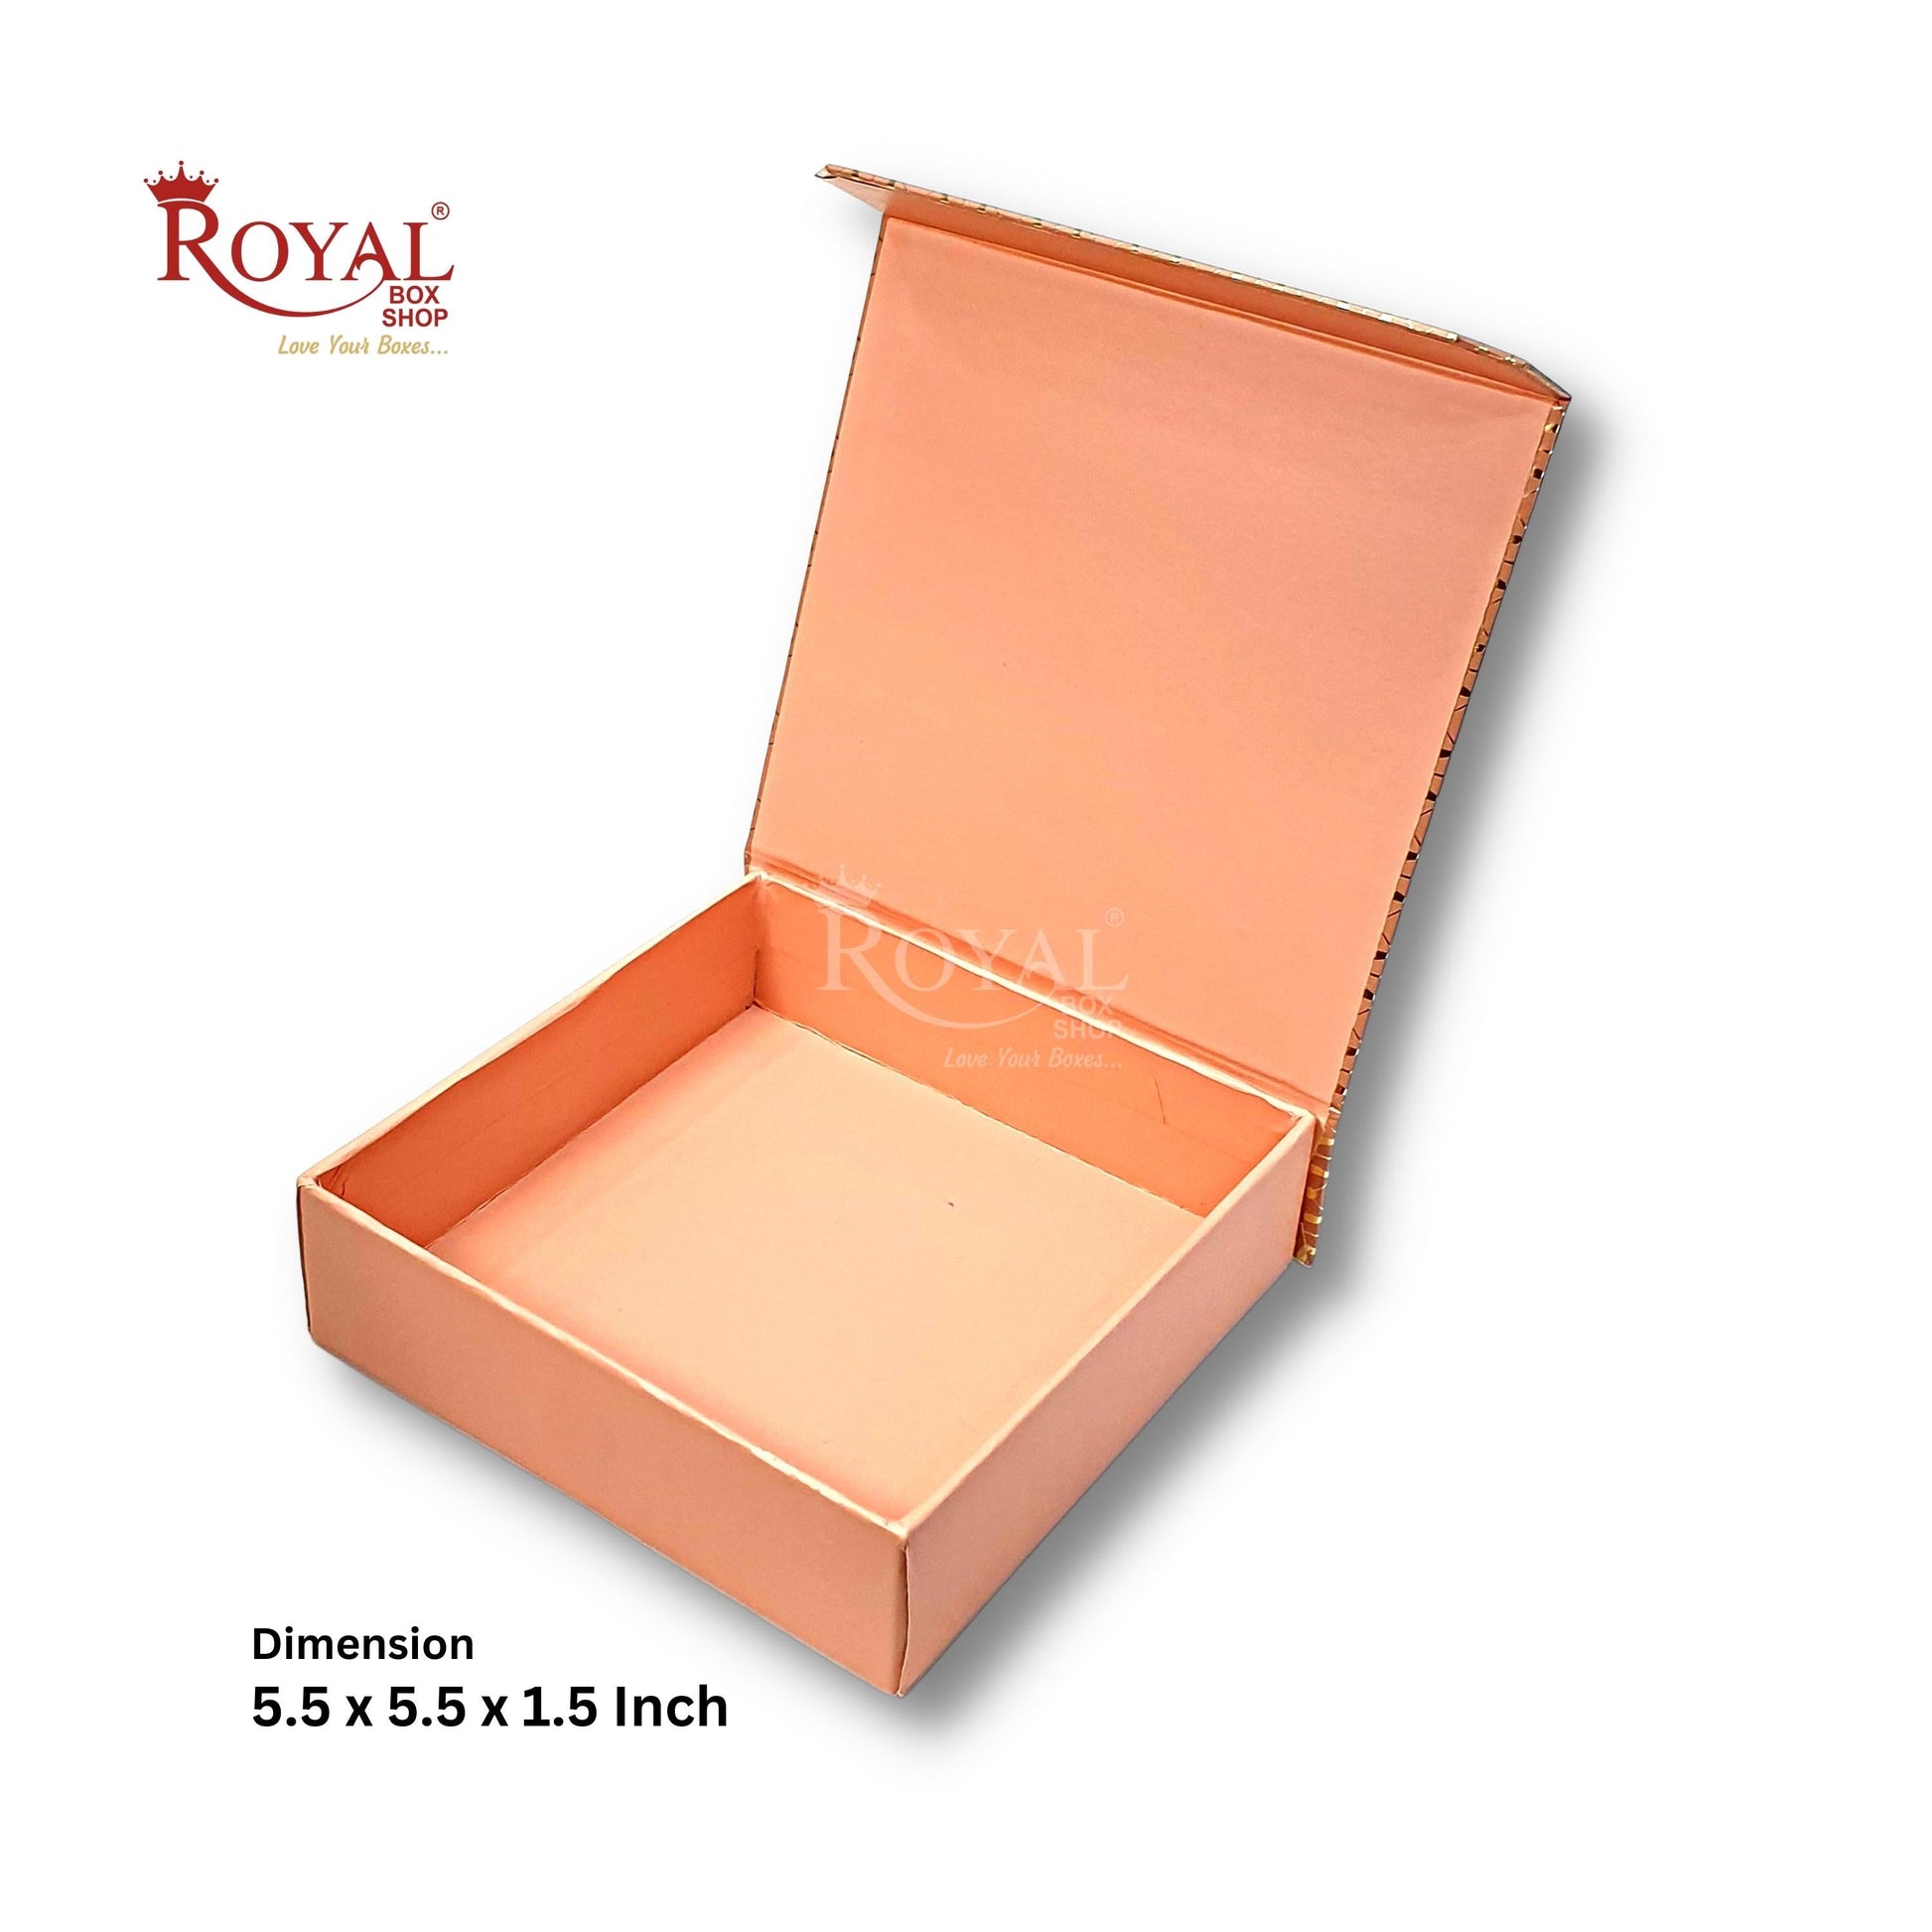 Rigid Chocolate Boxes 9 Cavity With Magnetic Flap I Pink with Gold Foiling I 5.5 X 5.5 X 1.5 Inch Royal Box Shop